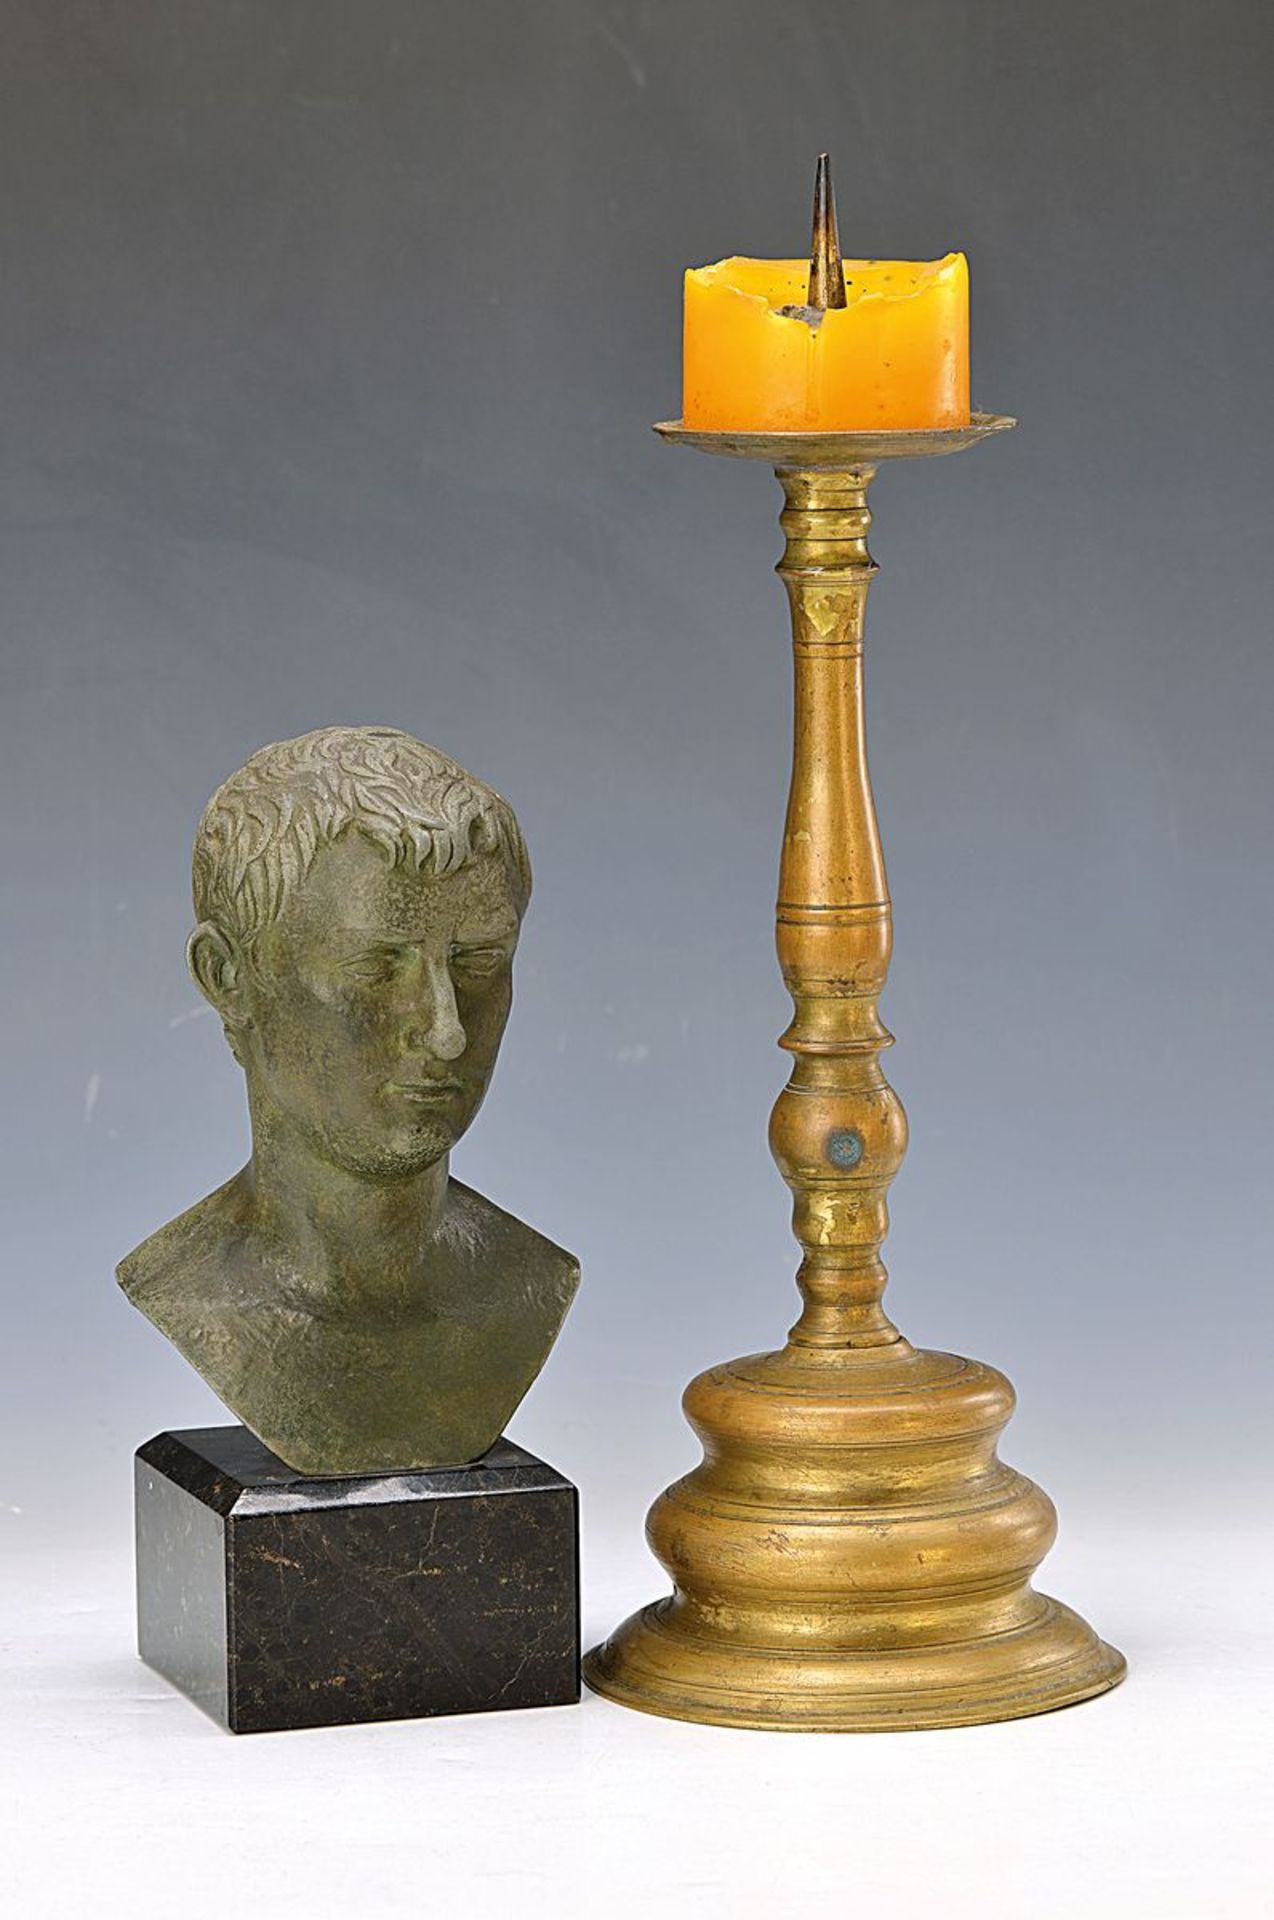 candlestick, German, around 1680, Bronze, screwed, additional thread, minor traces of age, H.